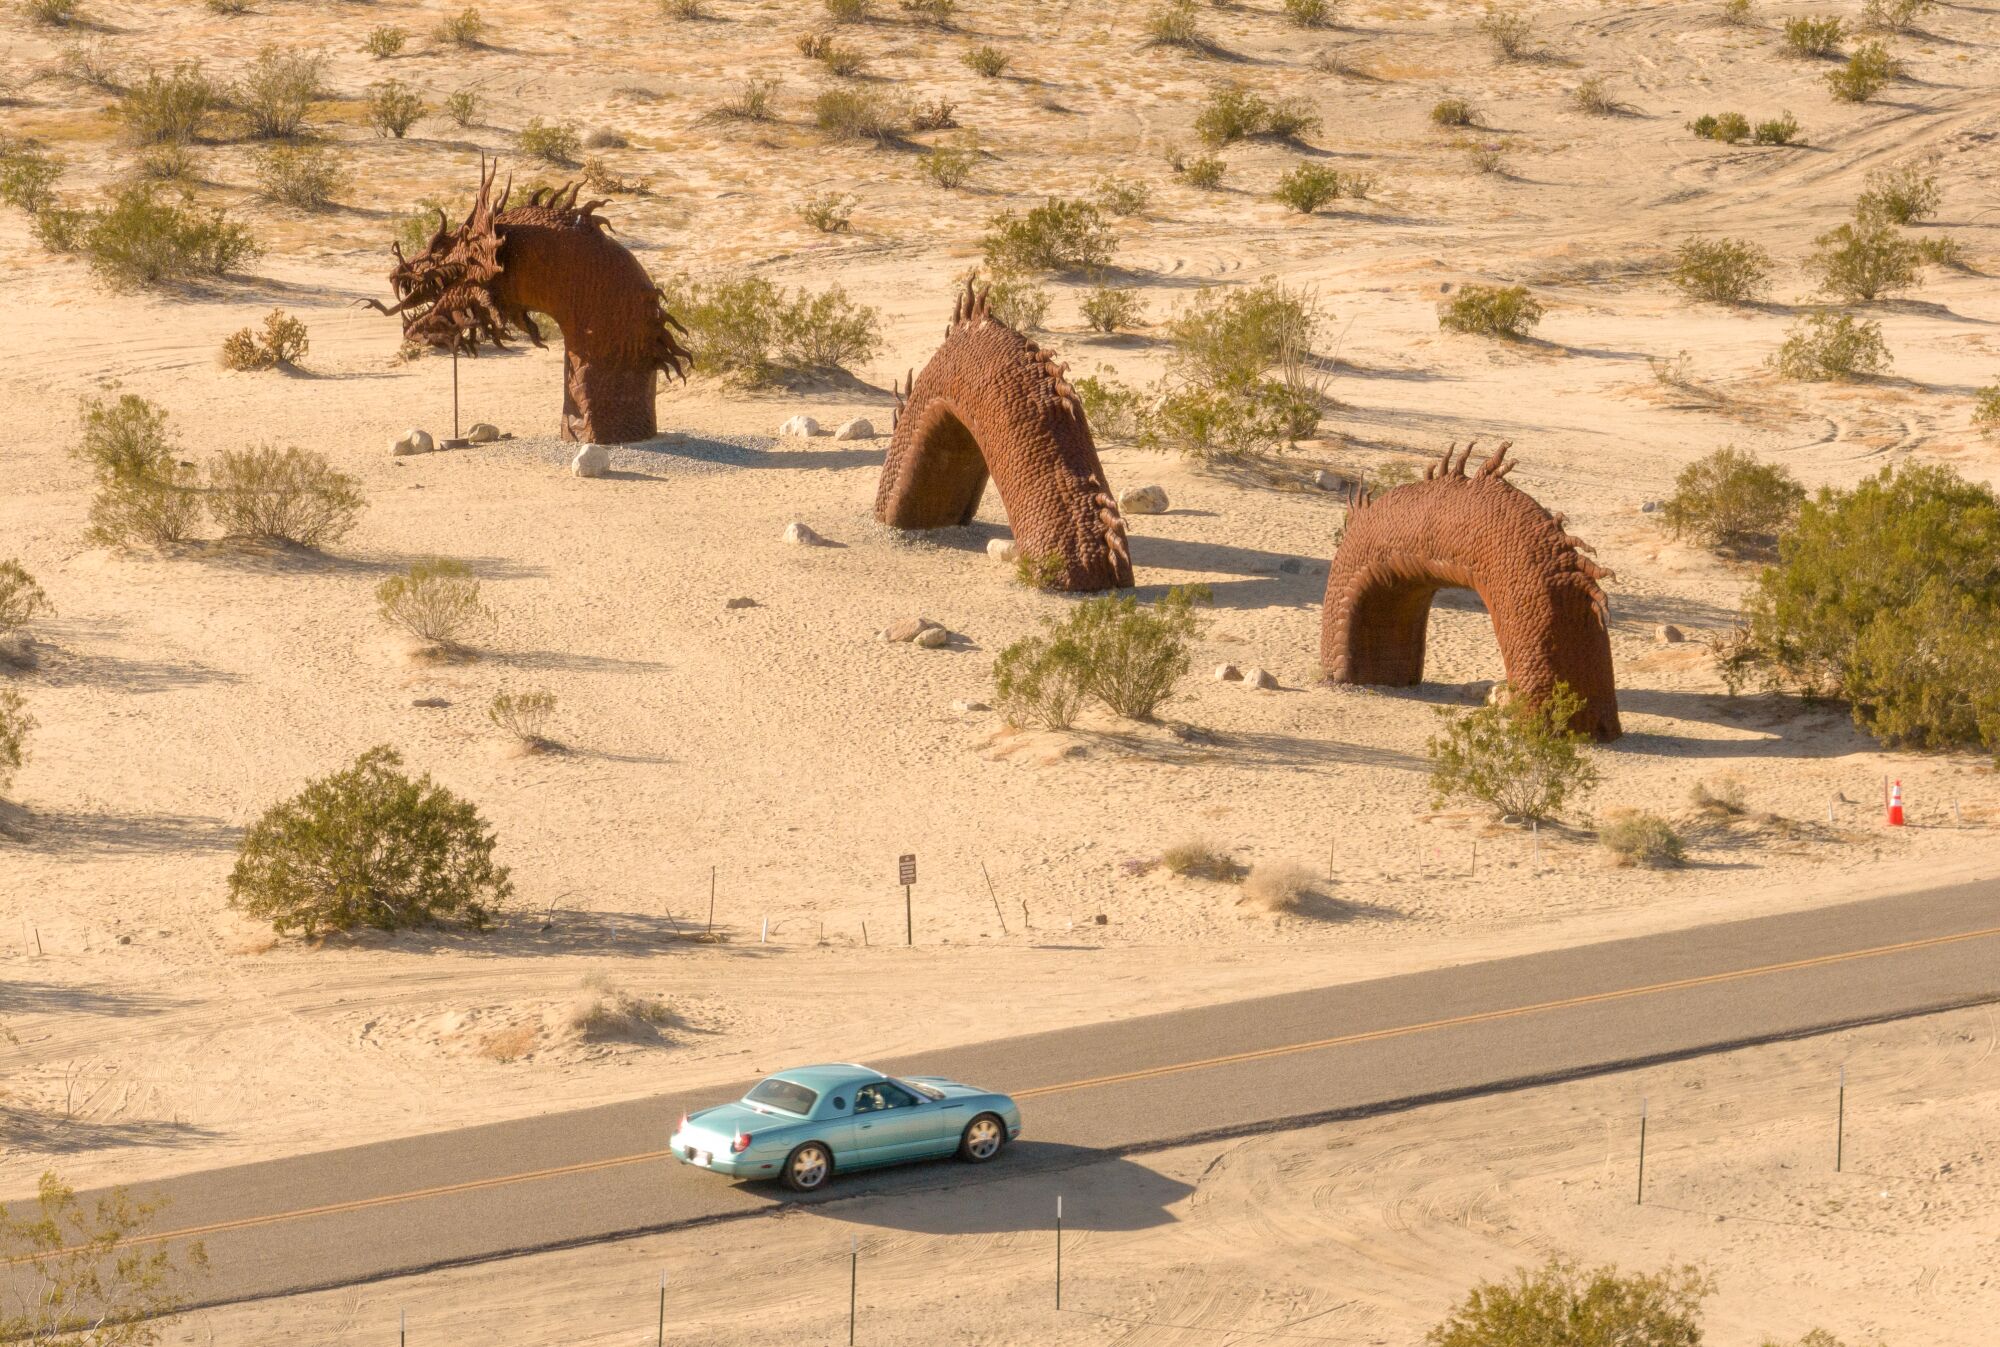 An overhead image of a giant metallic sea serpent statue in the desert, as a blue car passes by on the road next to it.